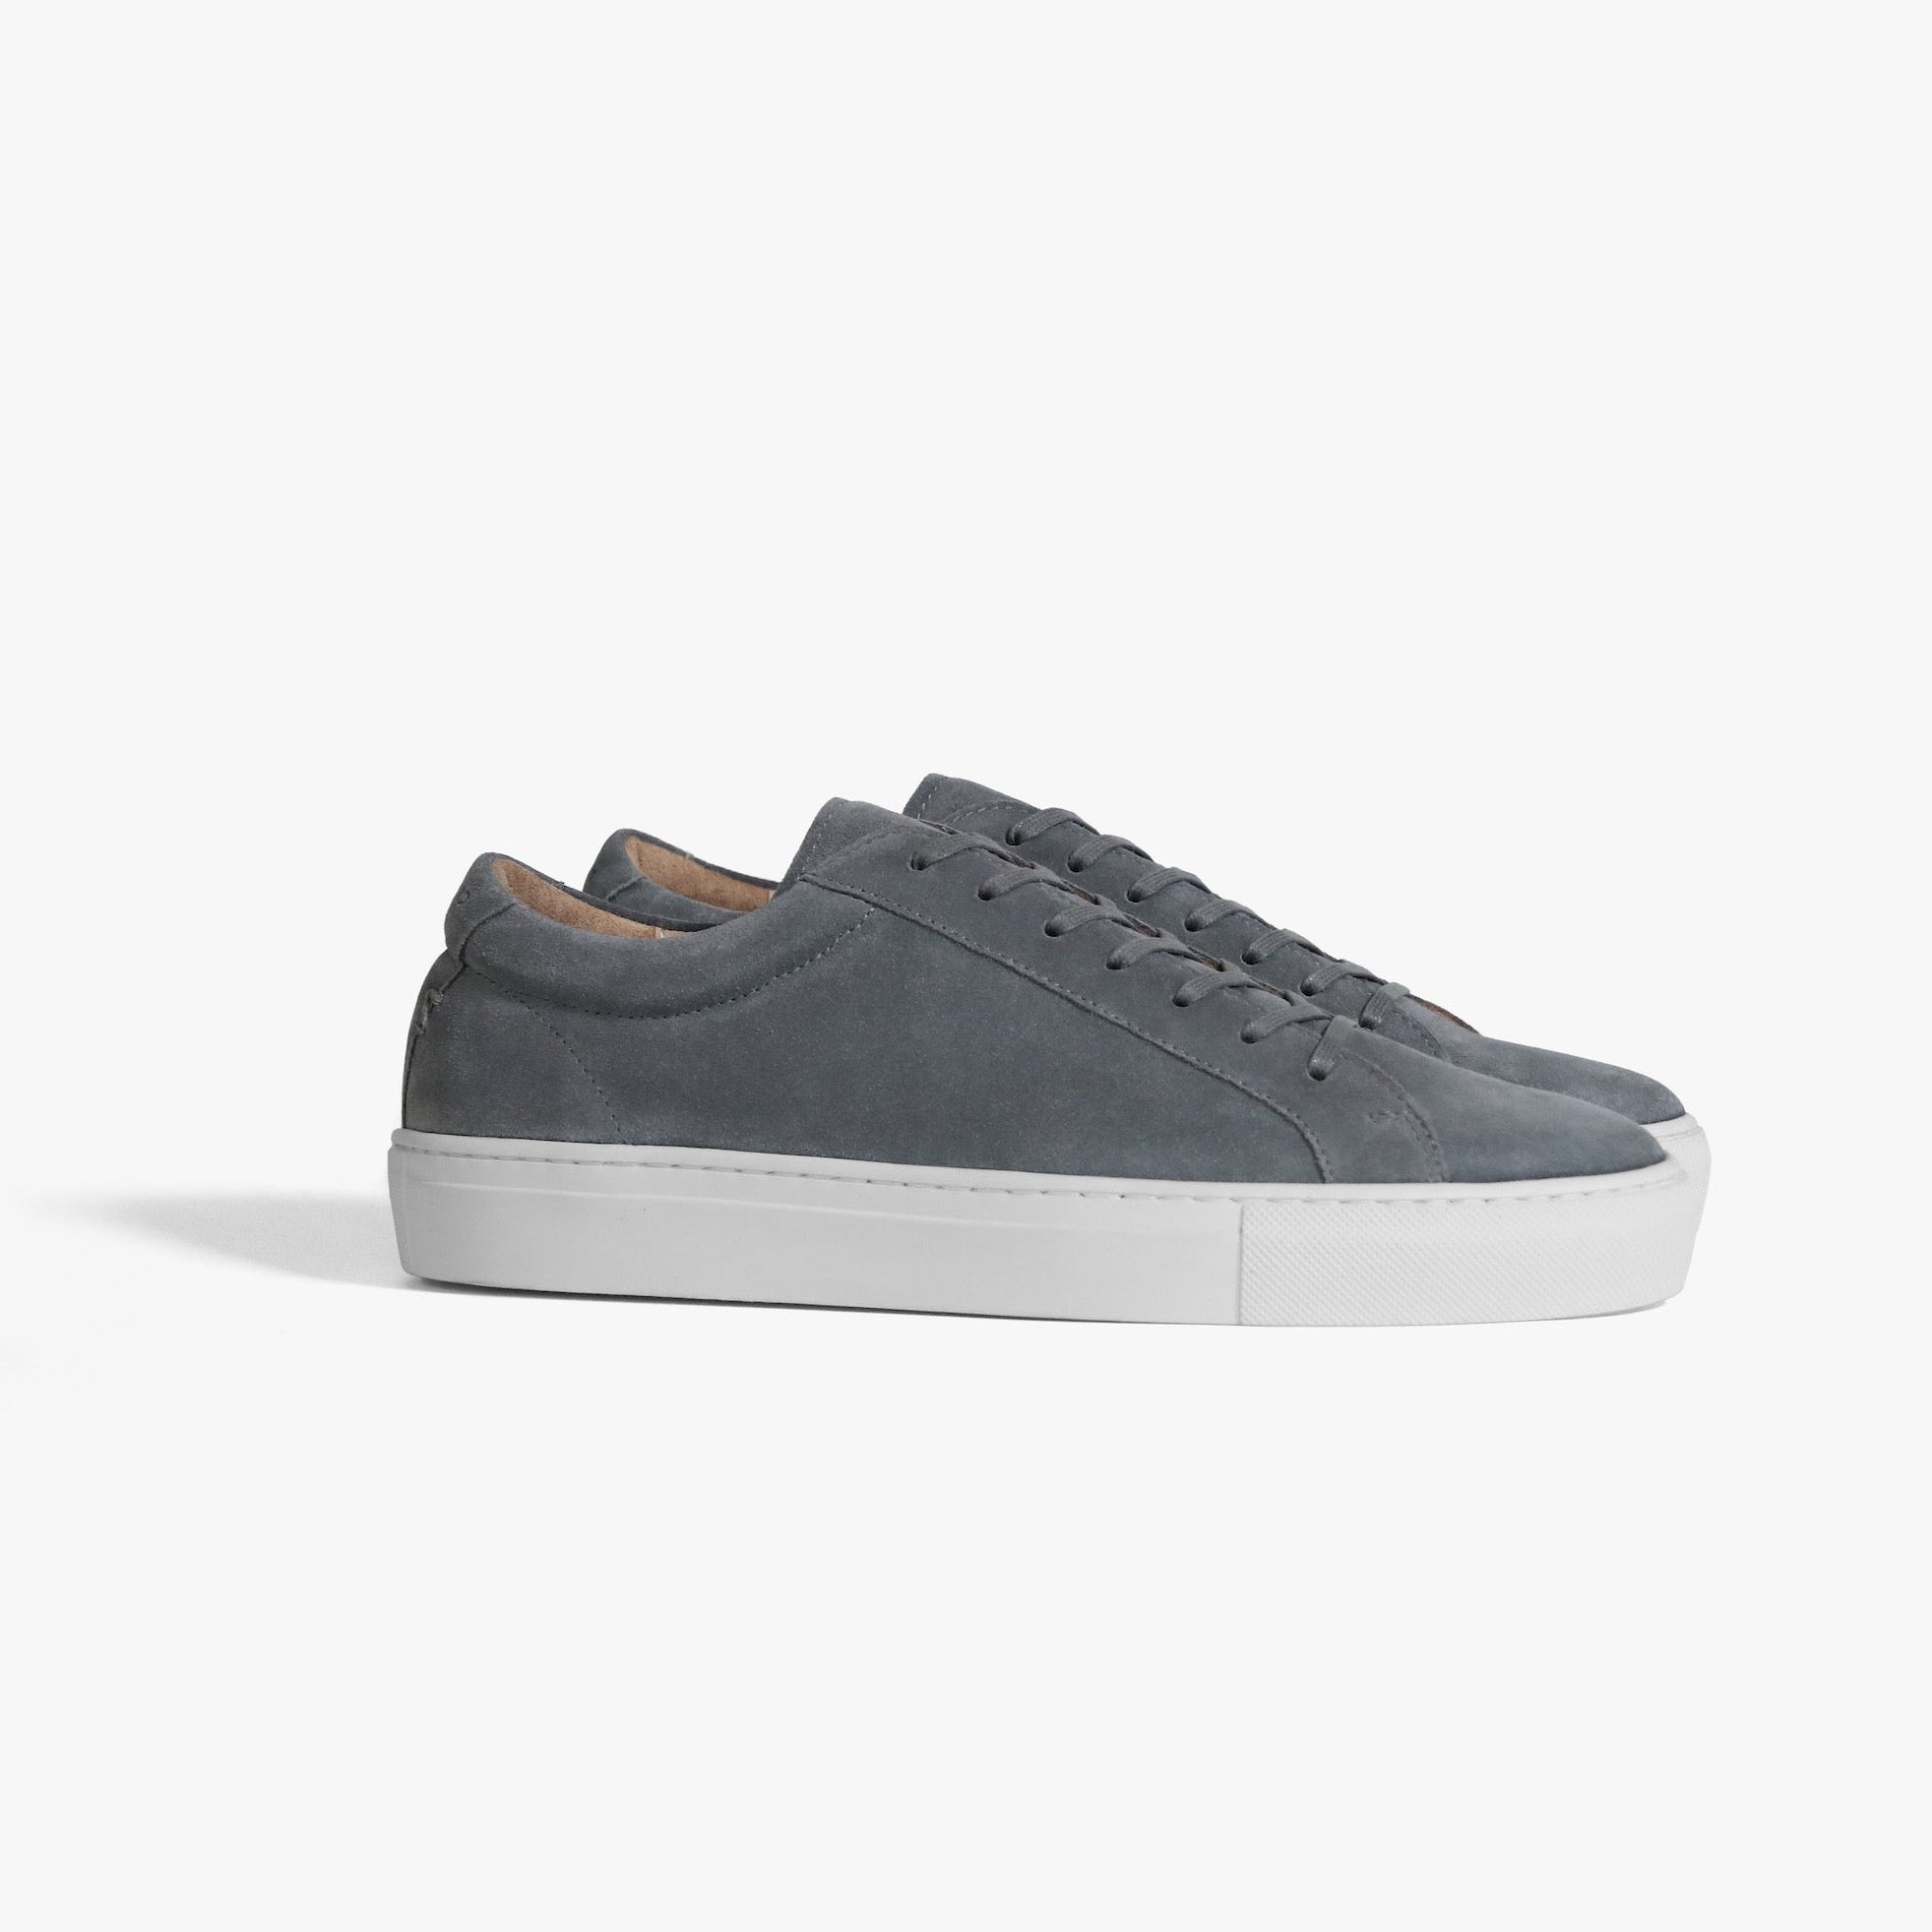 Series 1 Double Grey Suede Womens